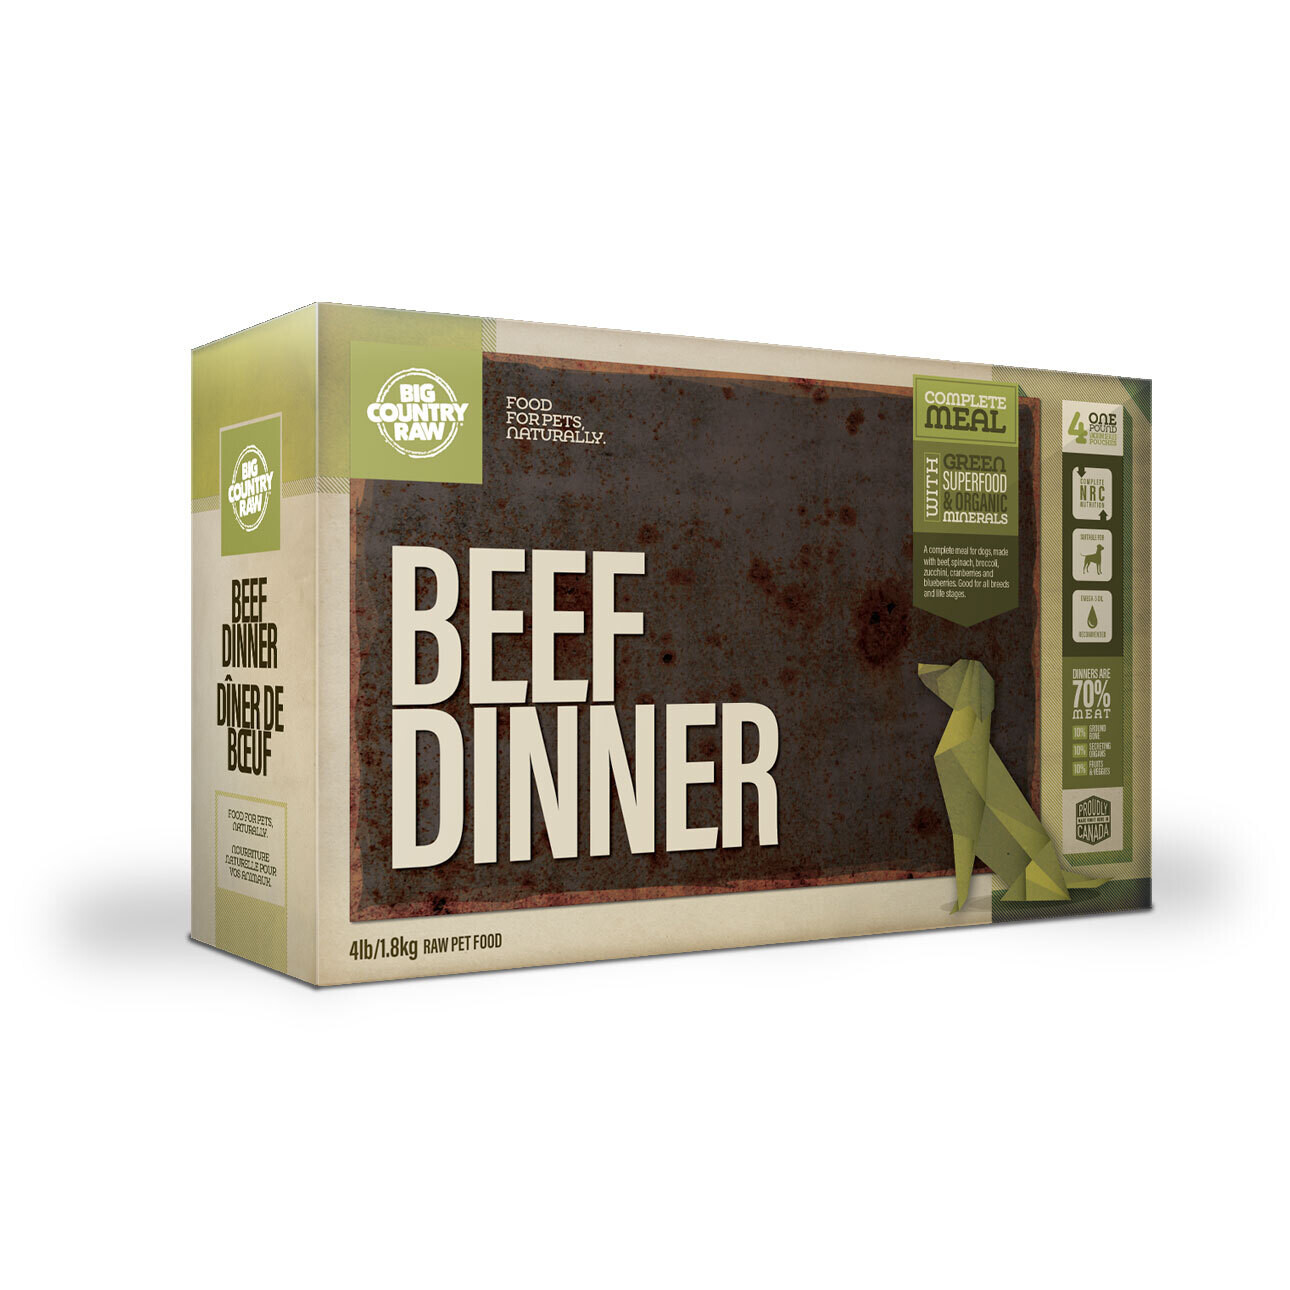 BIG COUNTRY RAW BEEF DINNER 4 X 1LB